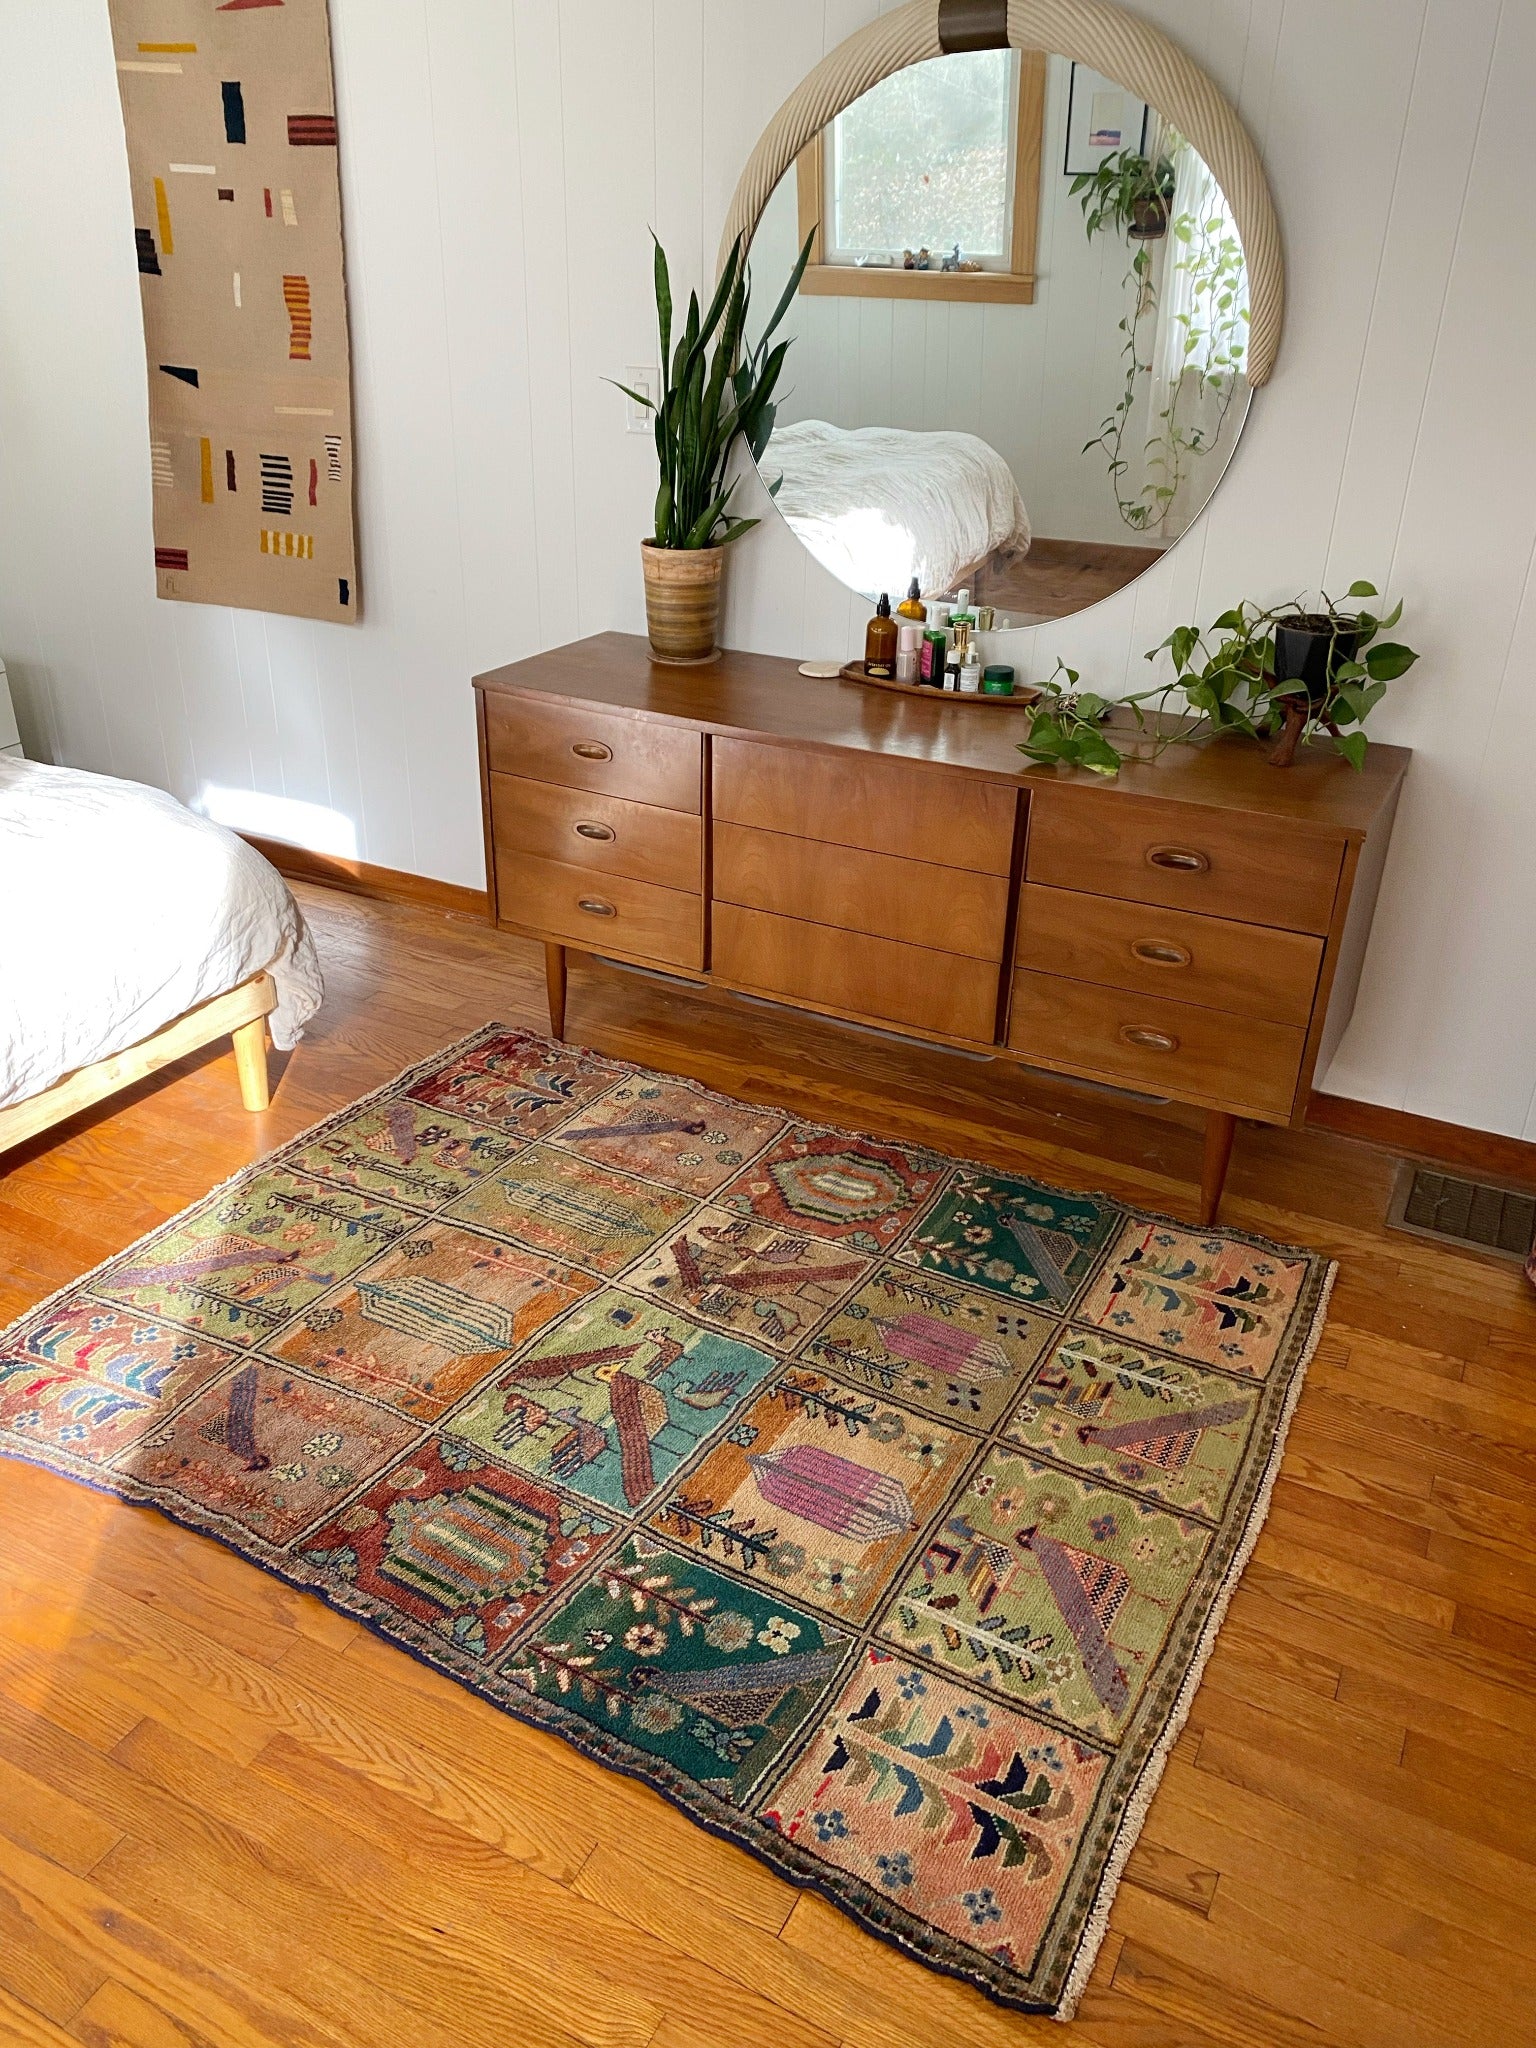 See Vera Persian Rug by a Dresser